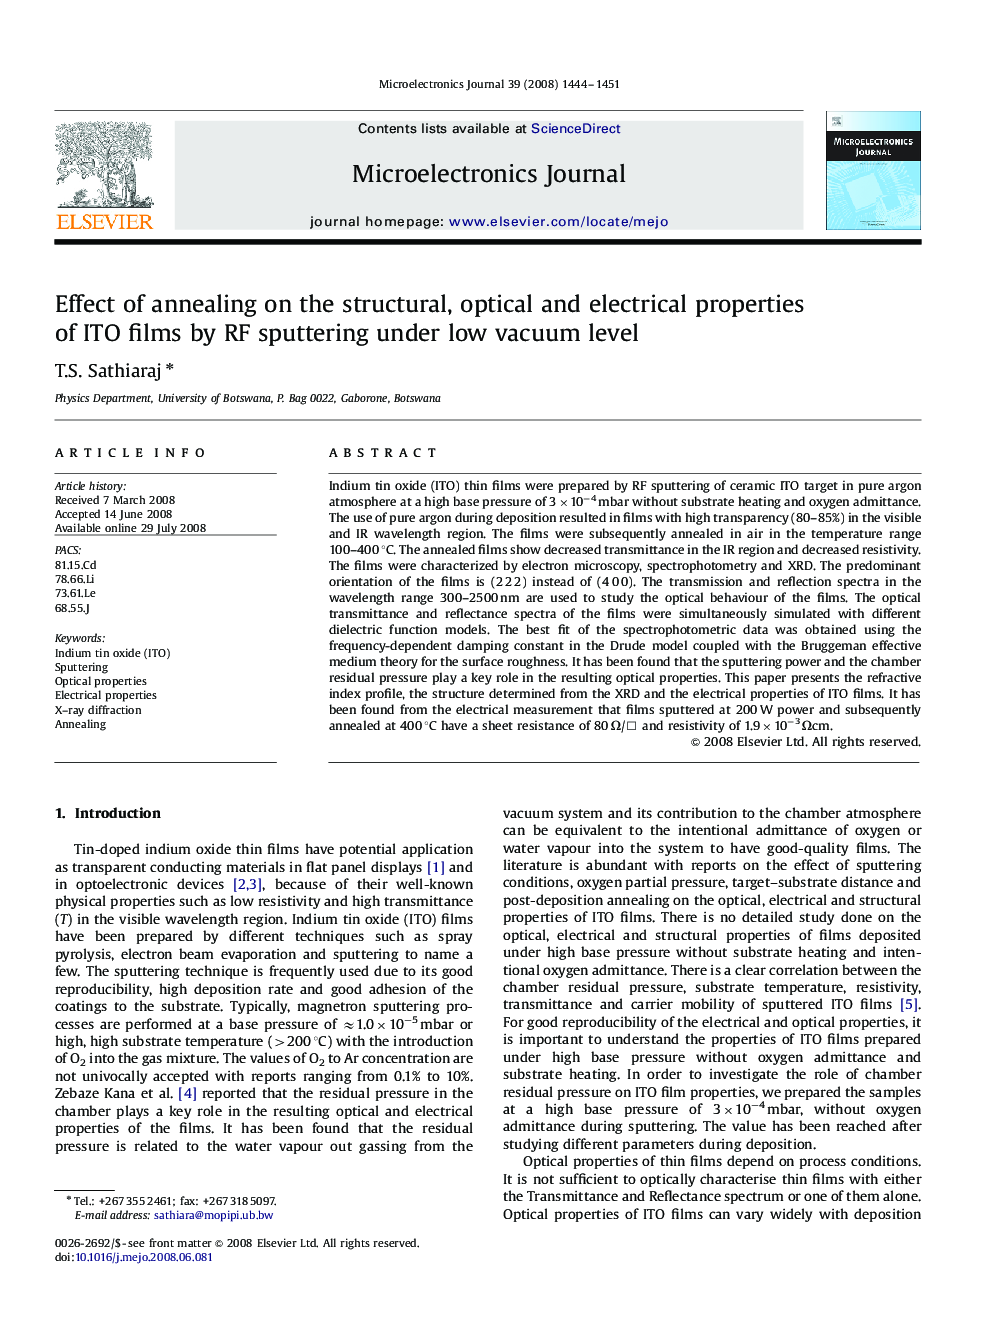 Effect of annealing on the structural, optical and electrical properties of ITO films by RF sputtering under low vacuum level